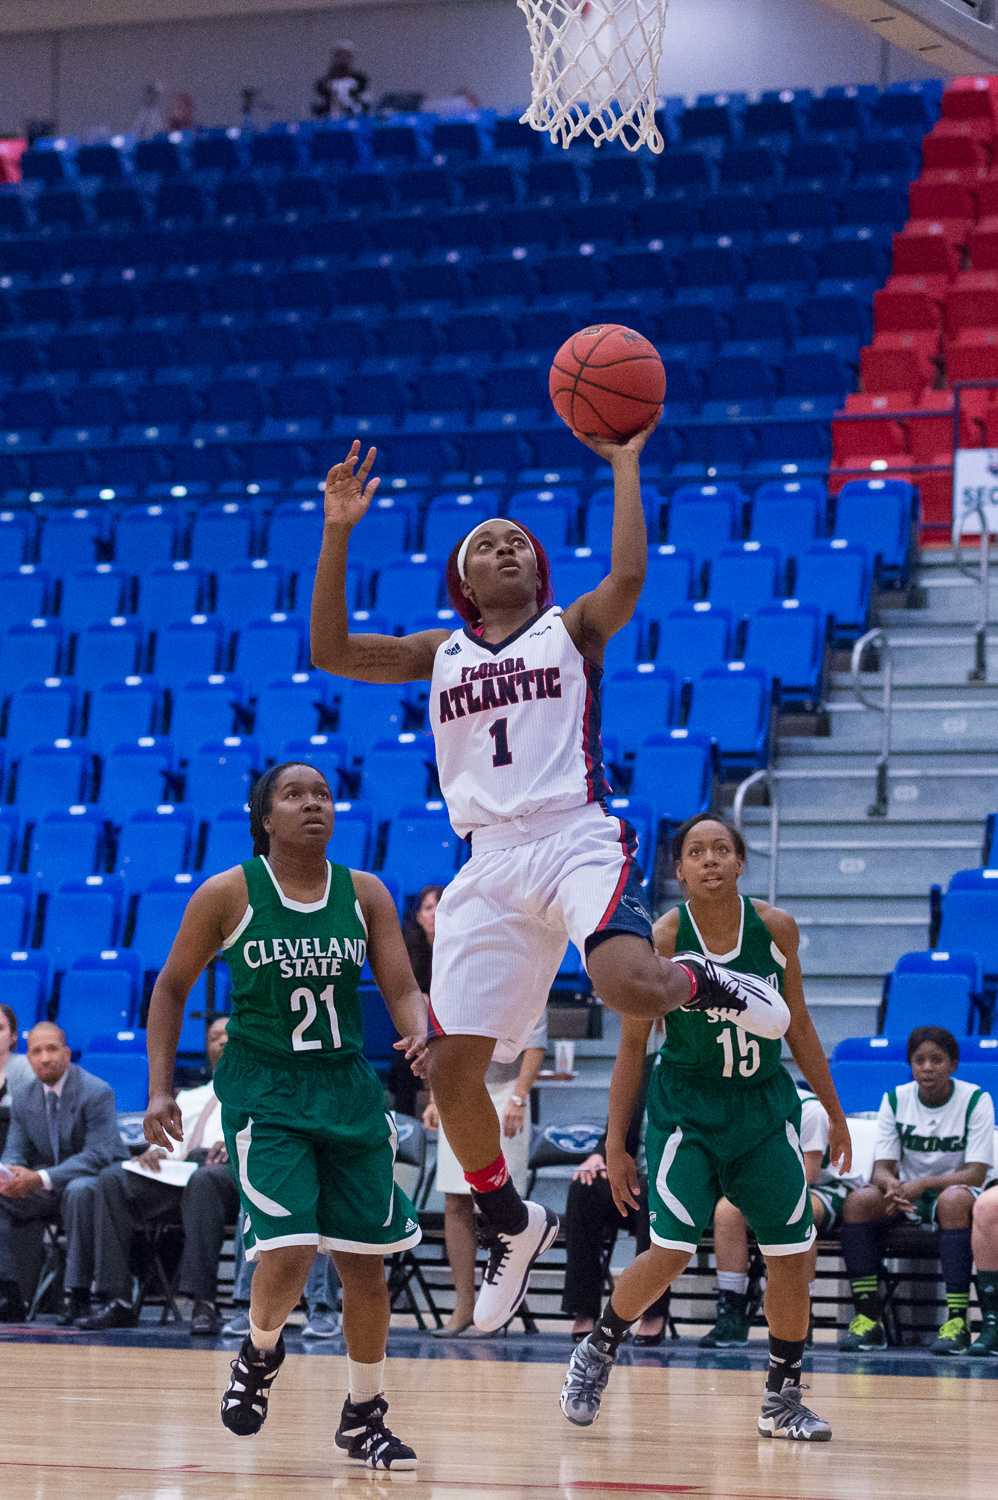 Owls guard Aaliyah Dotson goes for a successful layup to make the score 4-0 in the first minute of play against Cleveland State on Friday Nov. 21. 